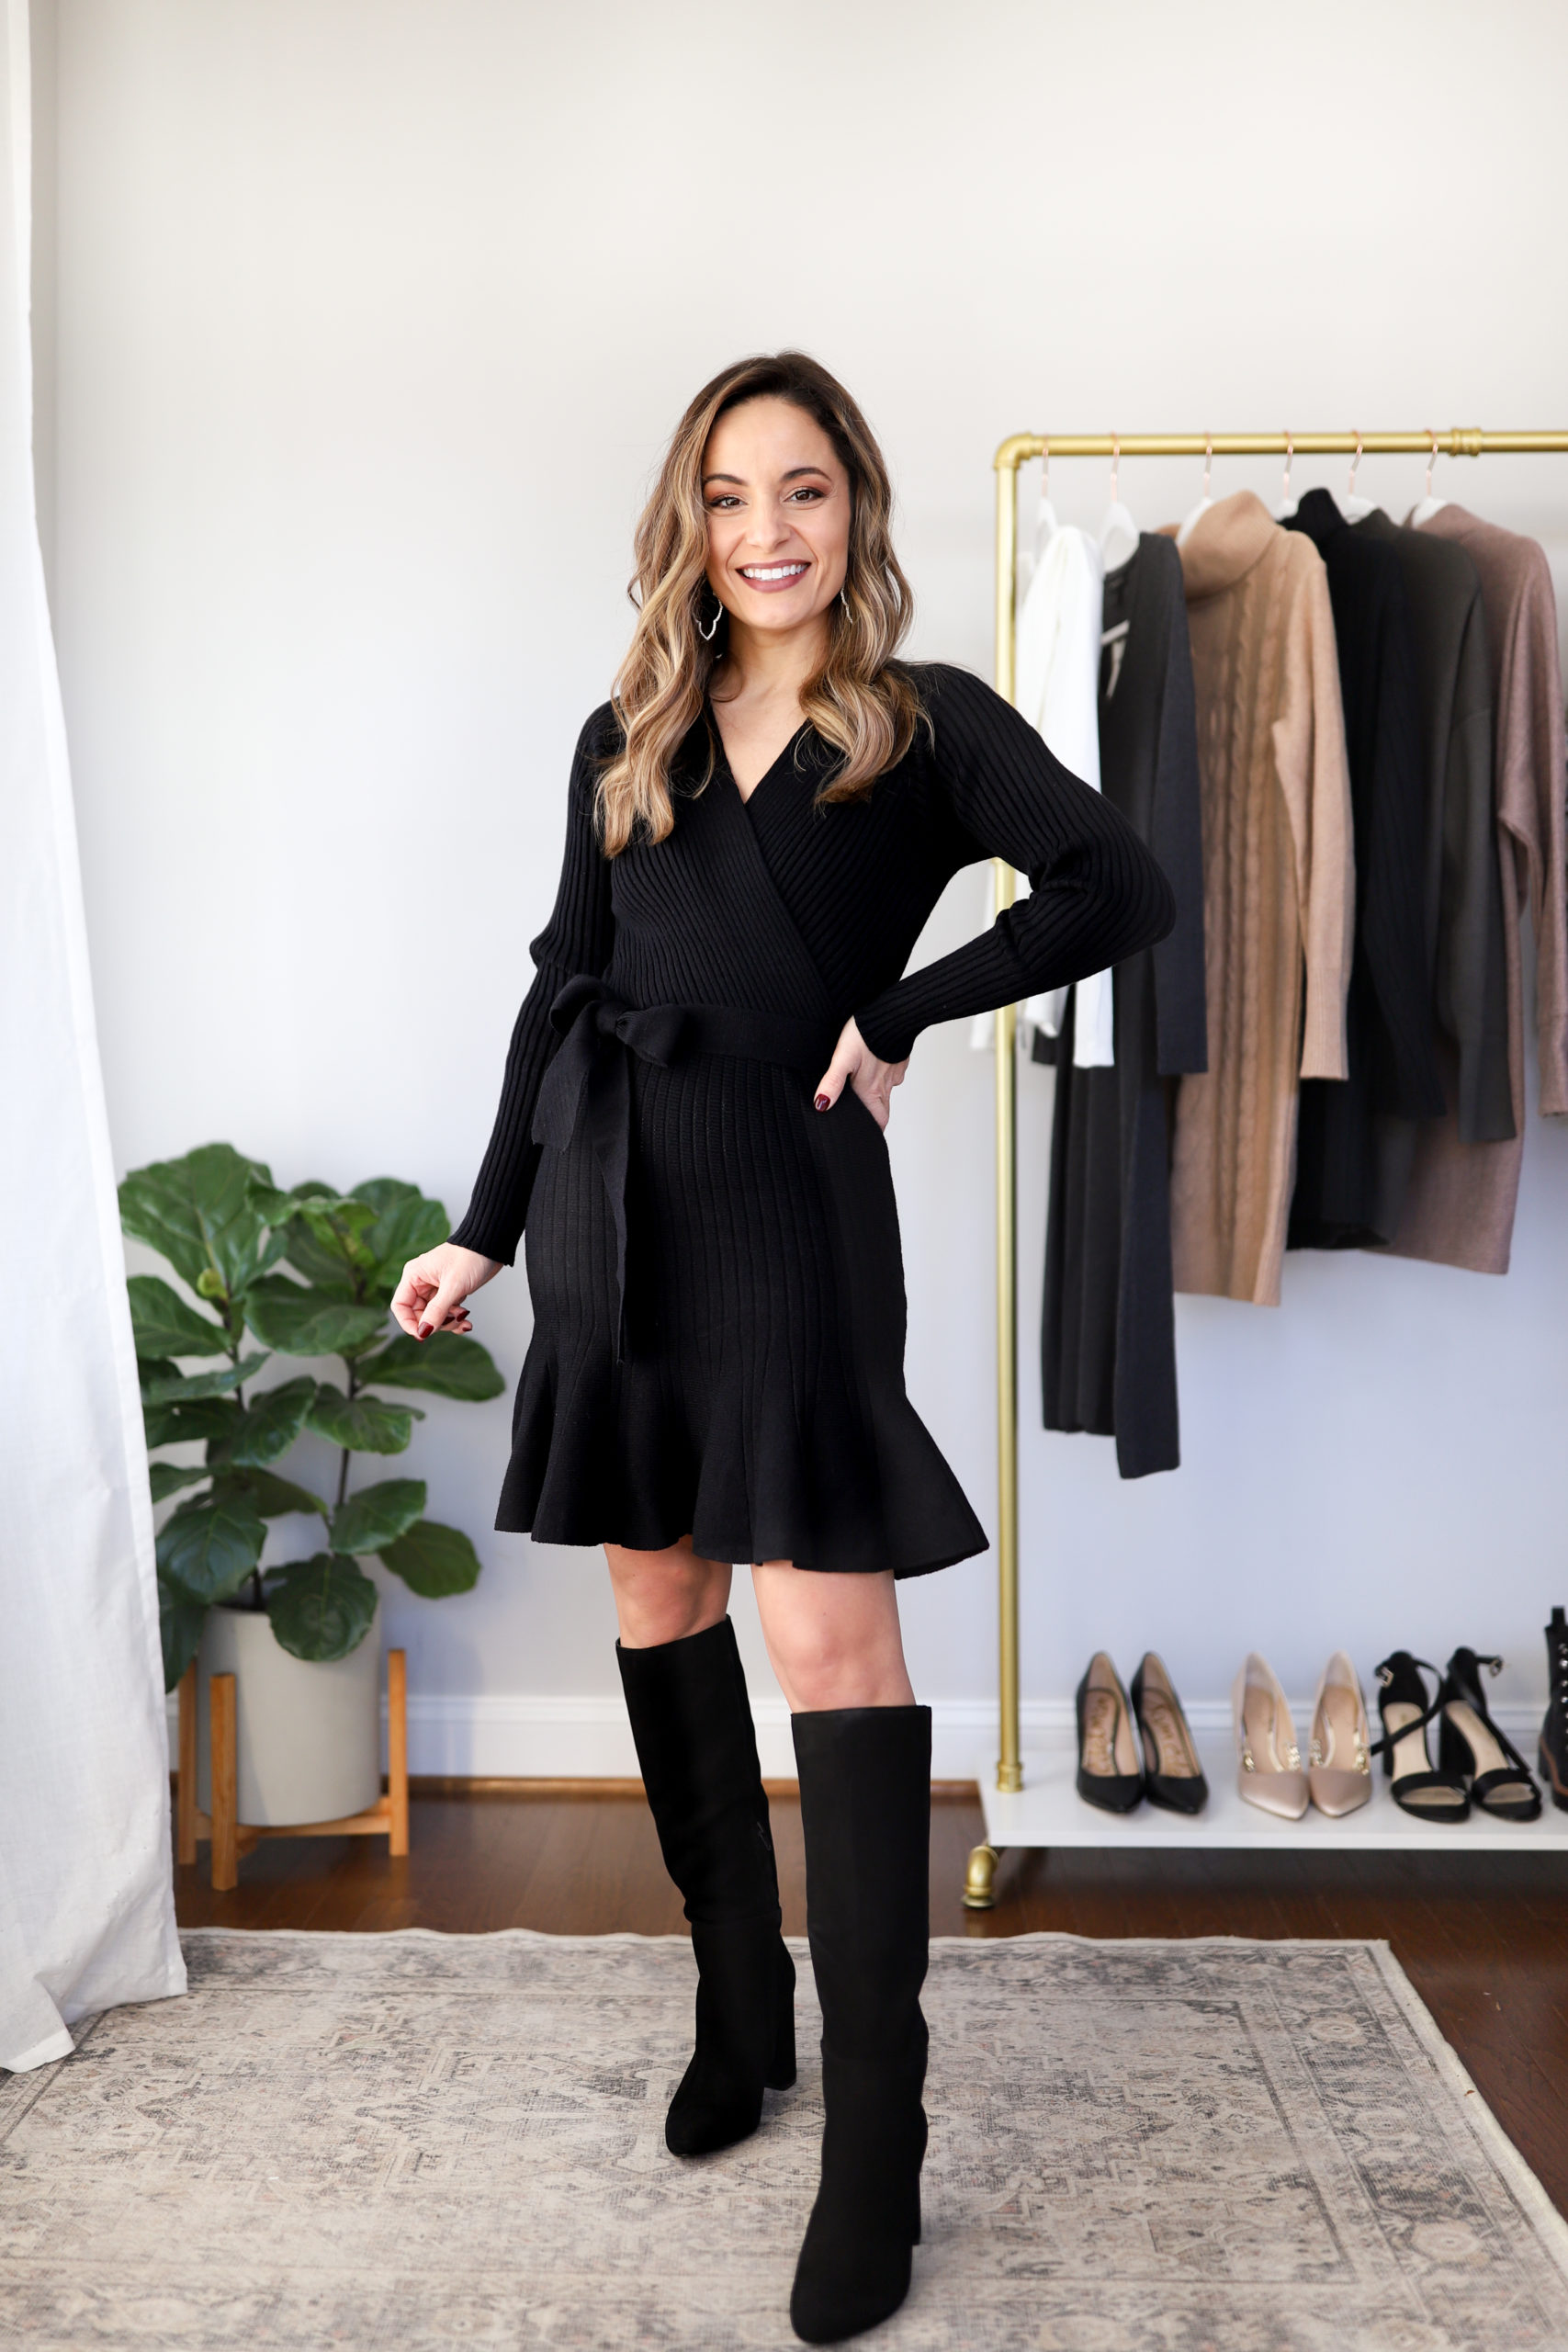 Black Leggings with Sweater Dress Outfits (12 ideas & outfits)